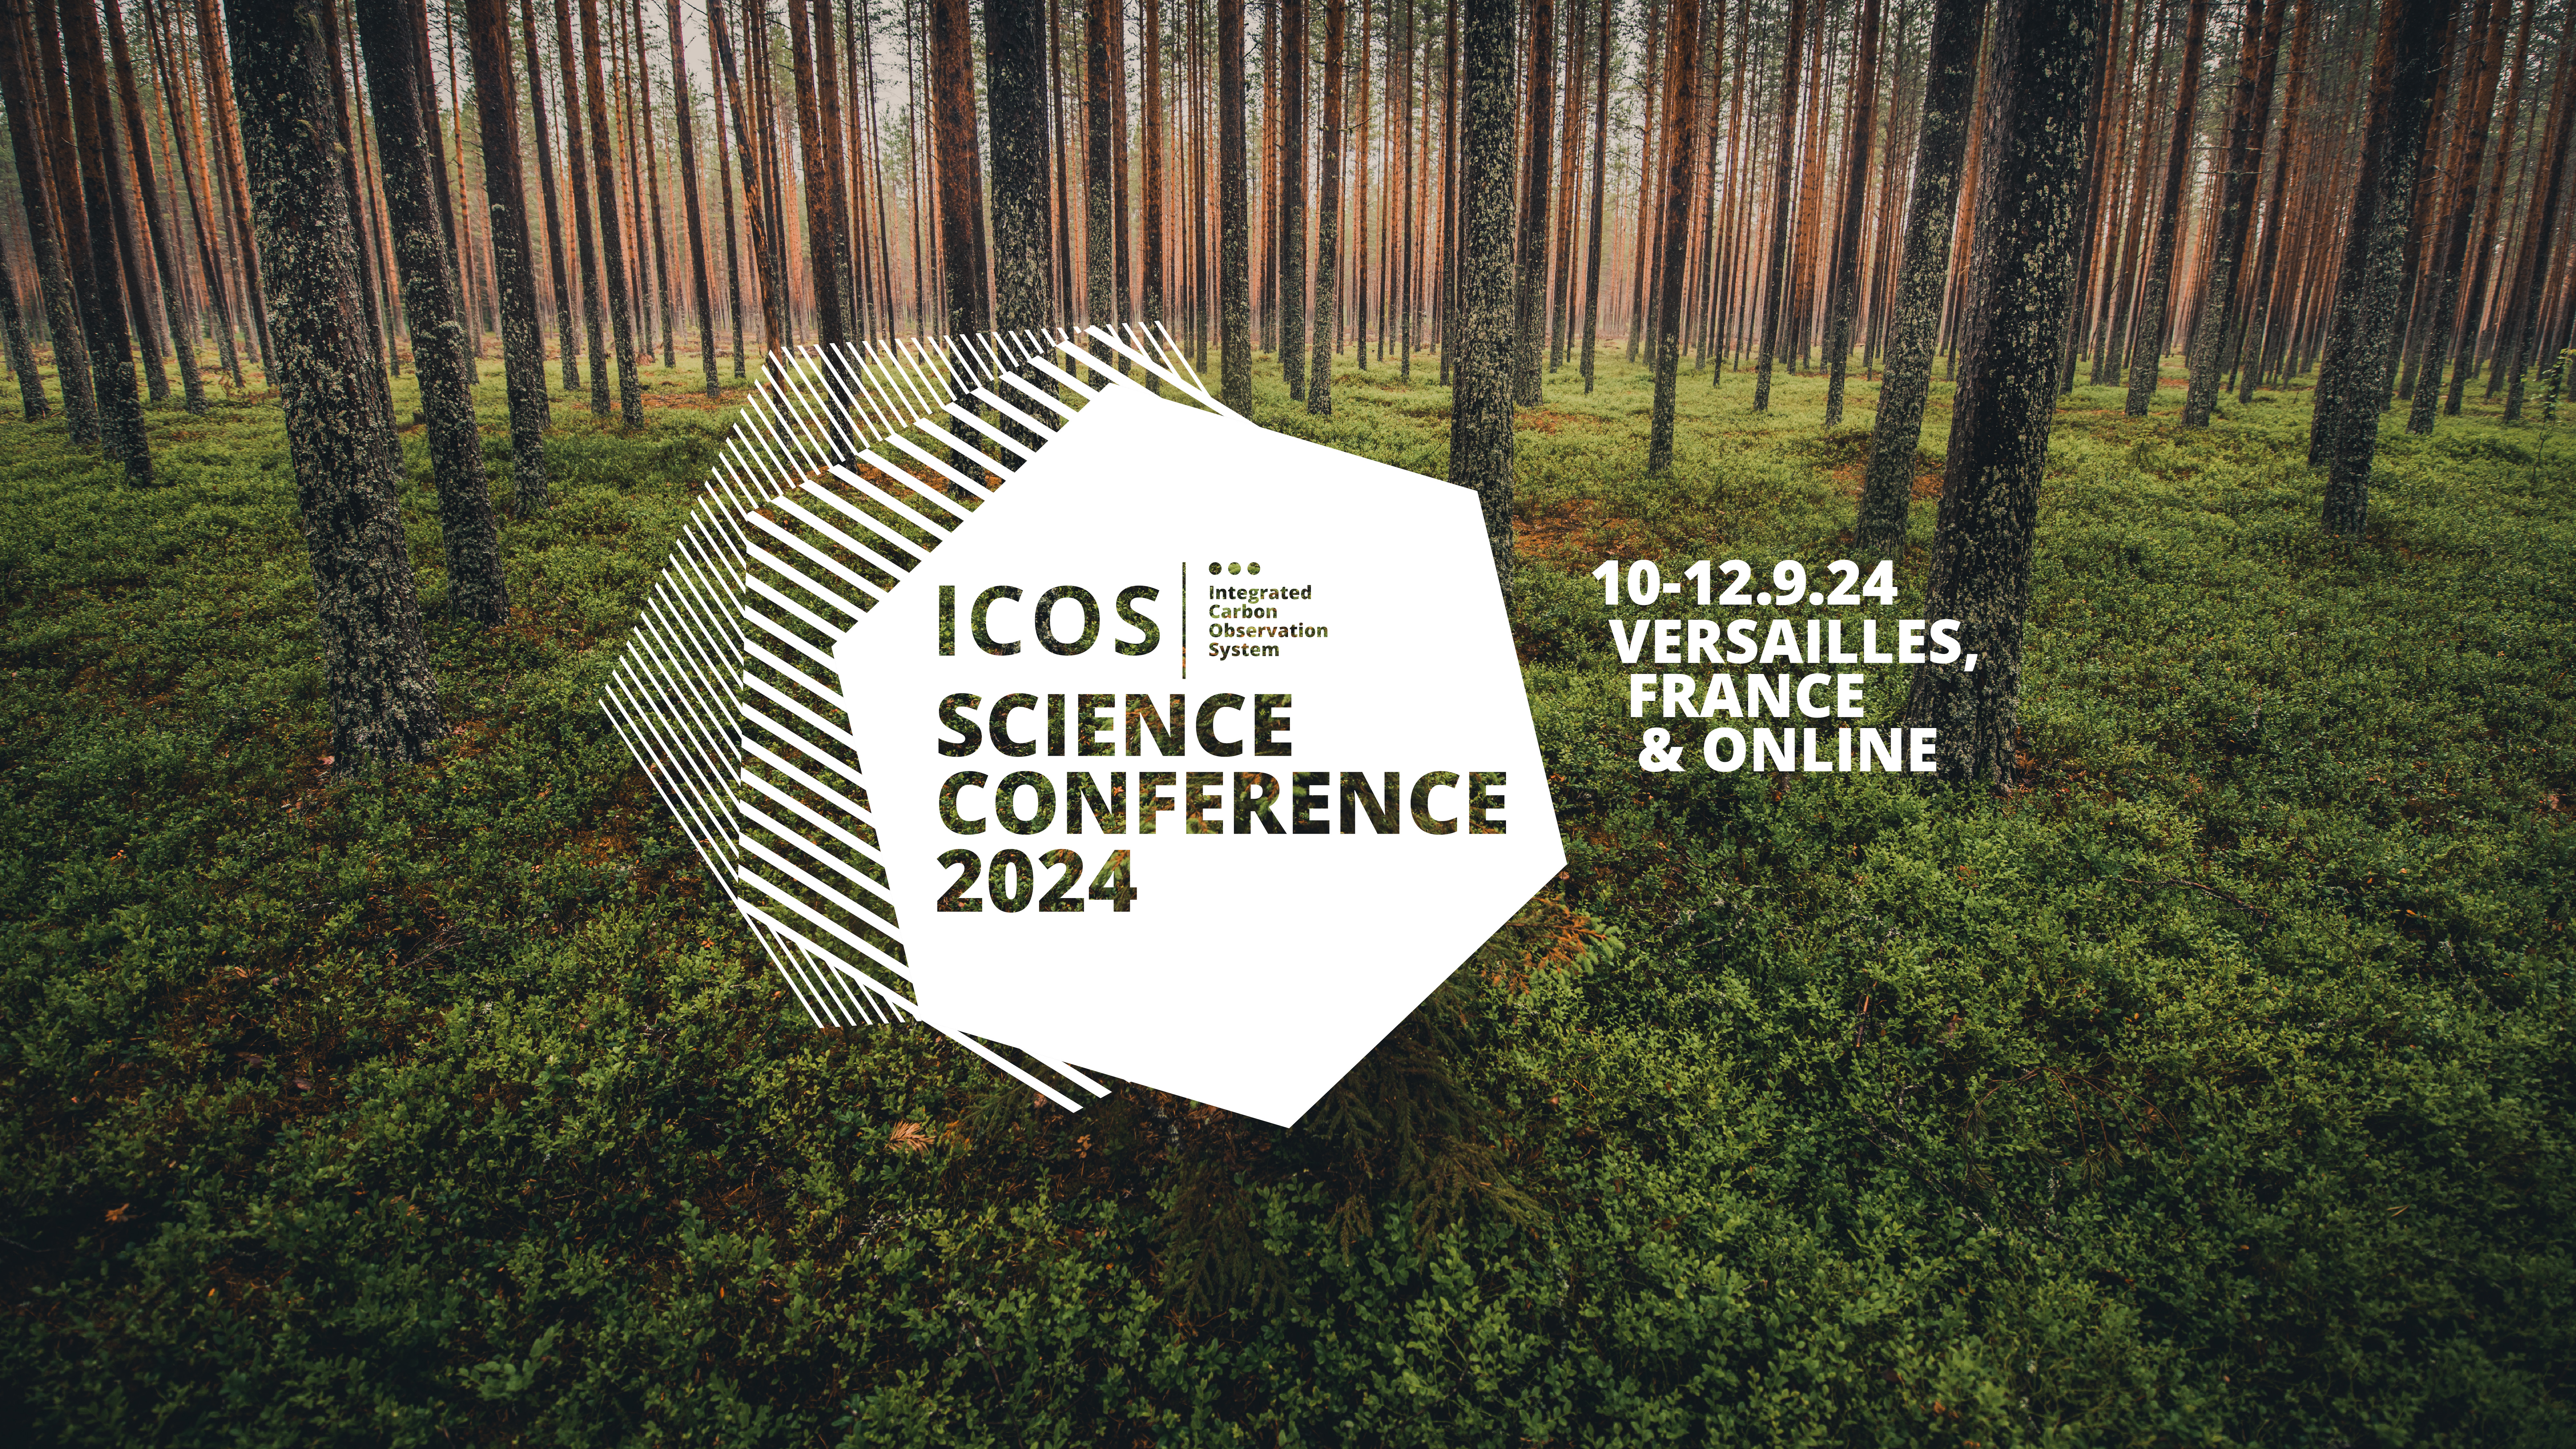 Call for abstracts for ICOS Science Conference 2024